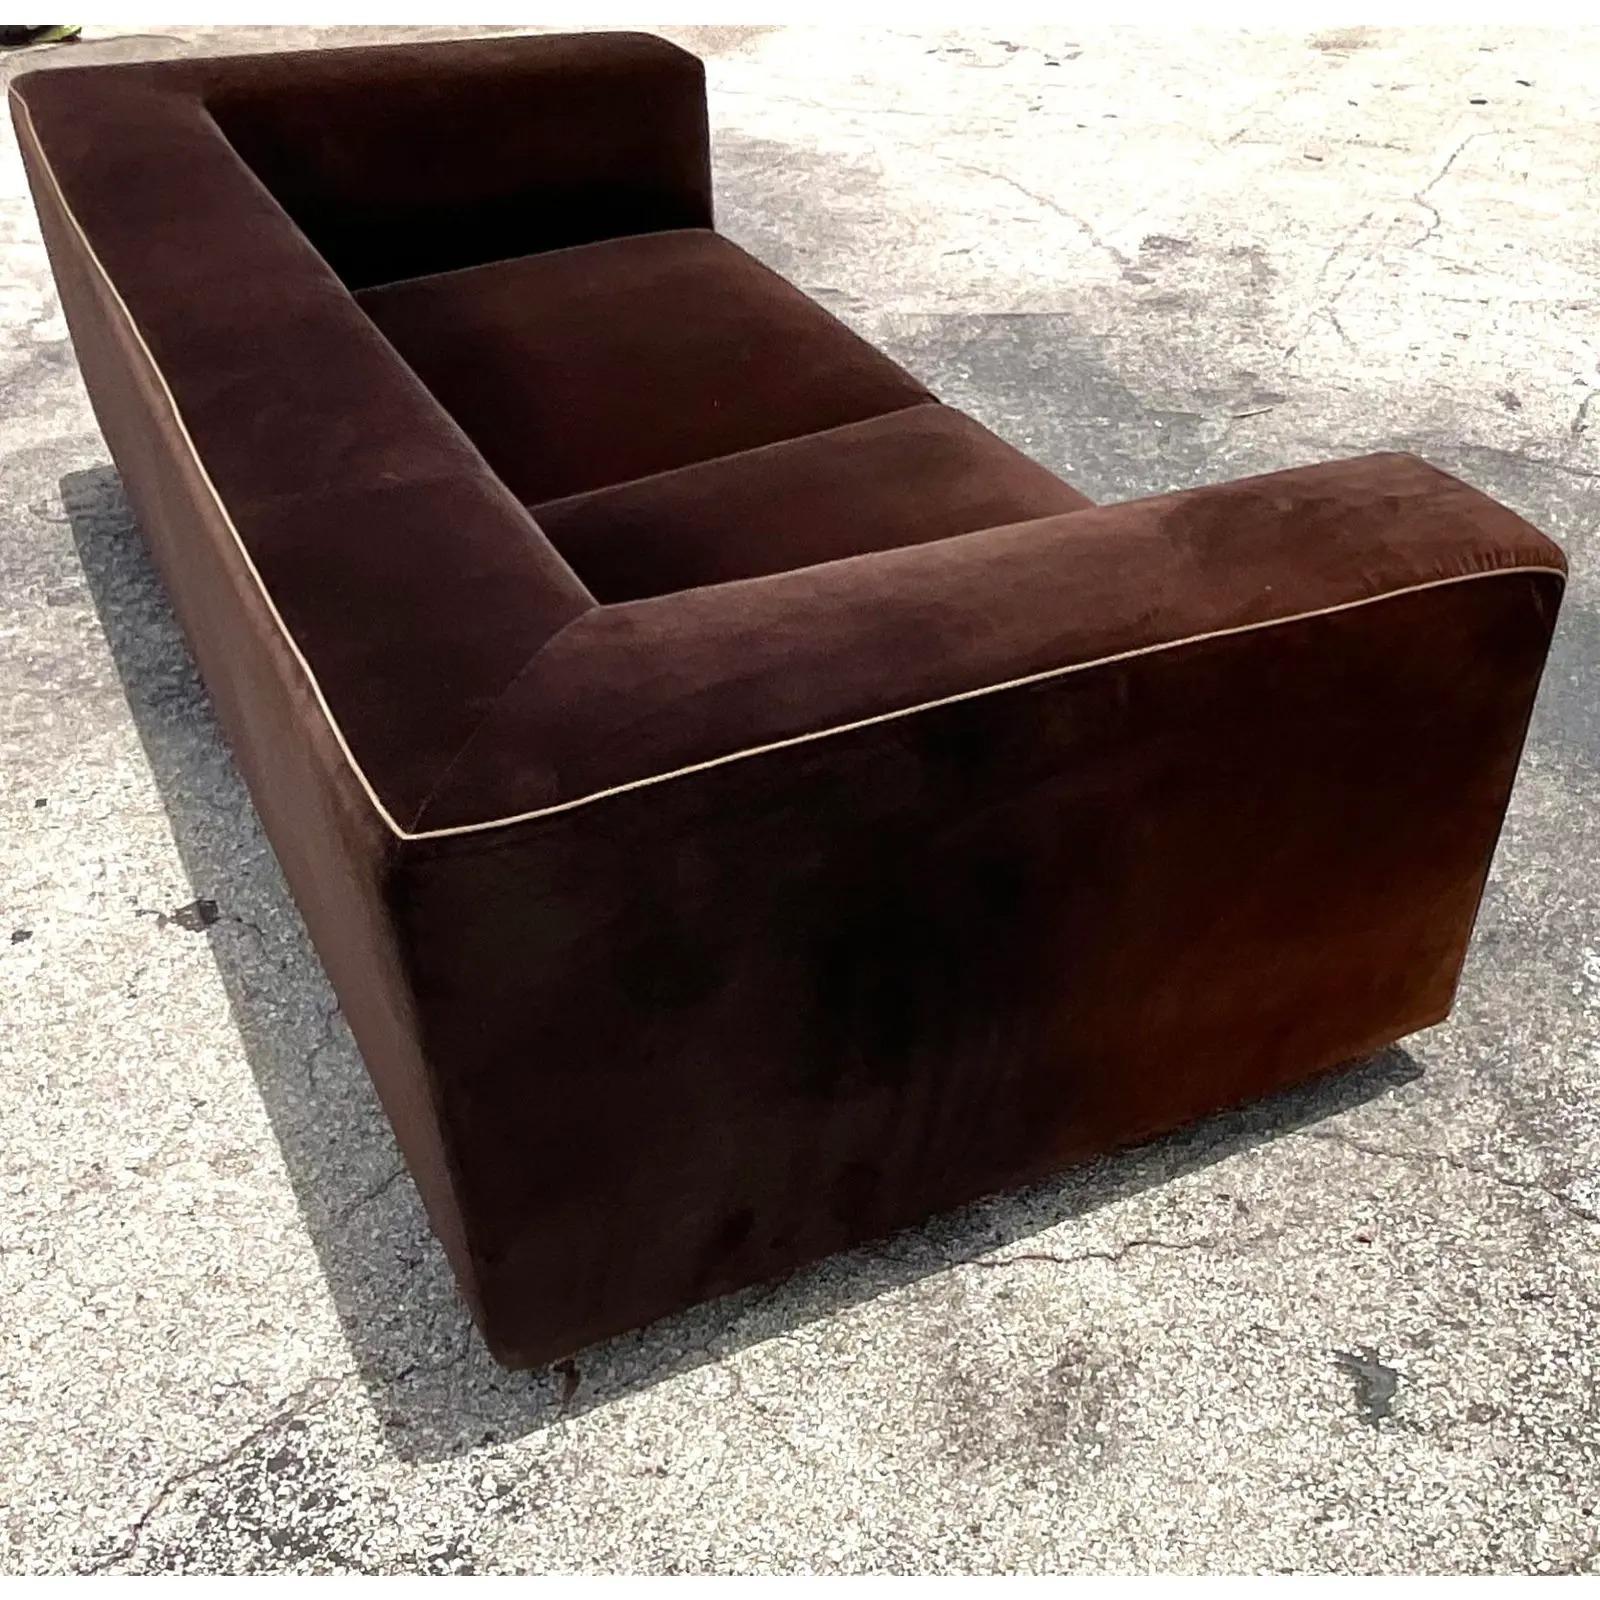 Fabulous vintage Italian Contemporary sofa. Made by the iconic Arketipo group. Beautiful brown velvet on a chic and sexy profile. Deep comfortable seats. Acquired from a Palm Beach estate.